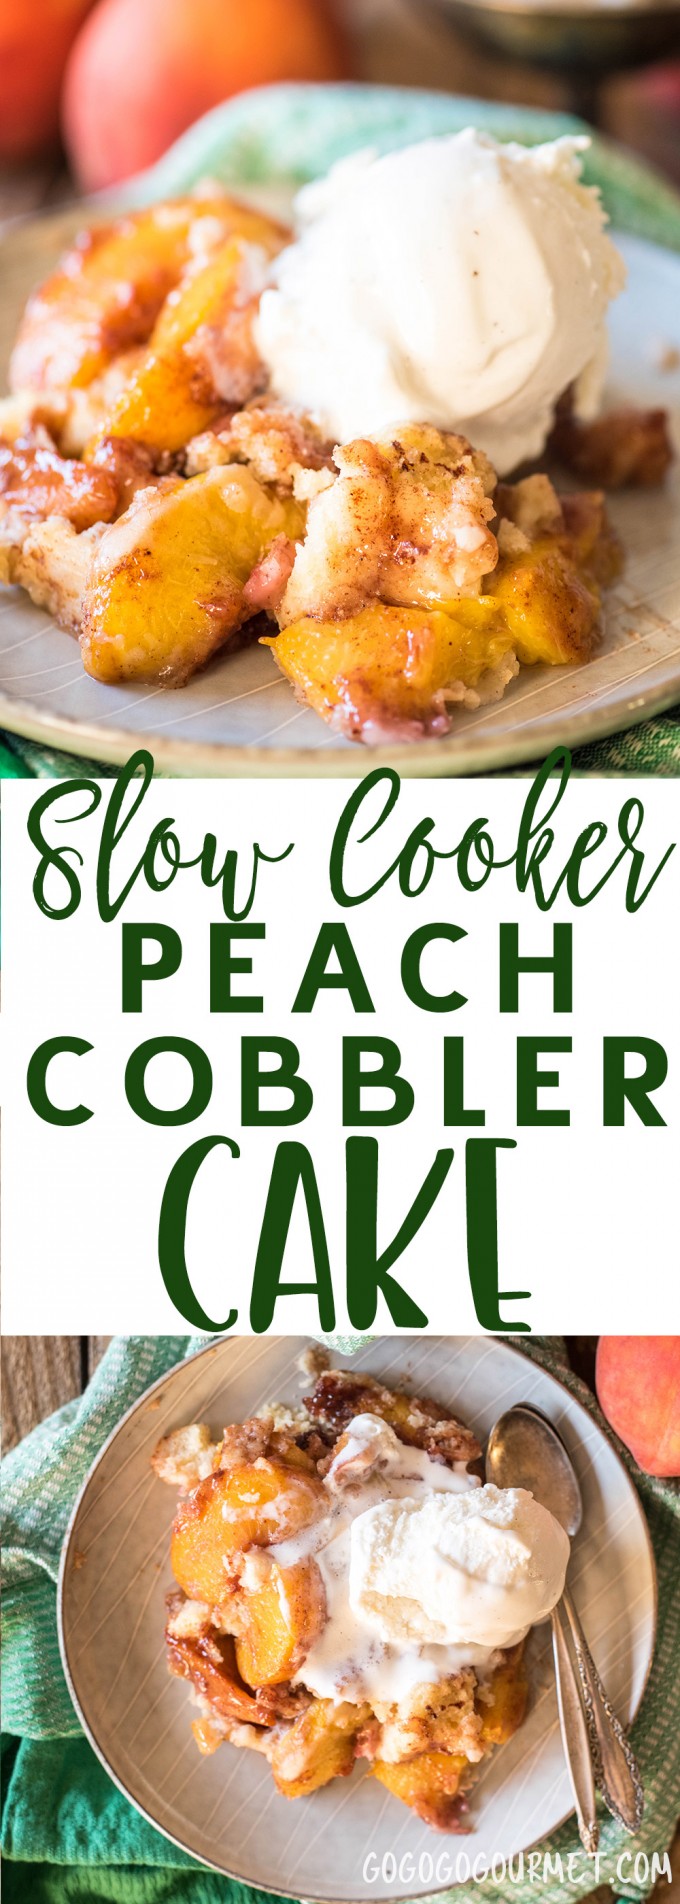 This Slow Cooker Peach Cobbler Cake is a low-fuss, completely delicious, summer cake that is full of ripe peaches! via @gogogogourmet